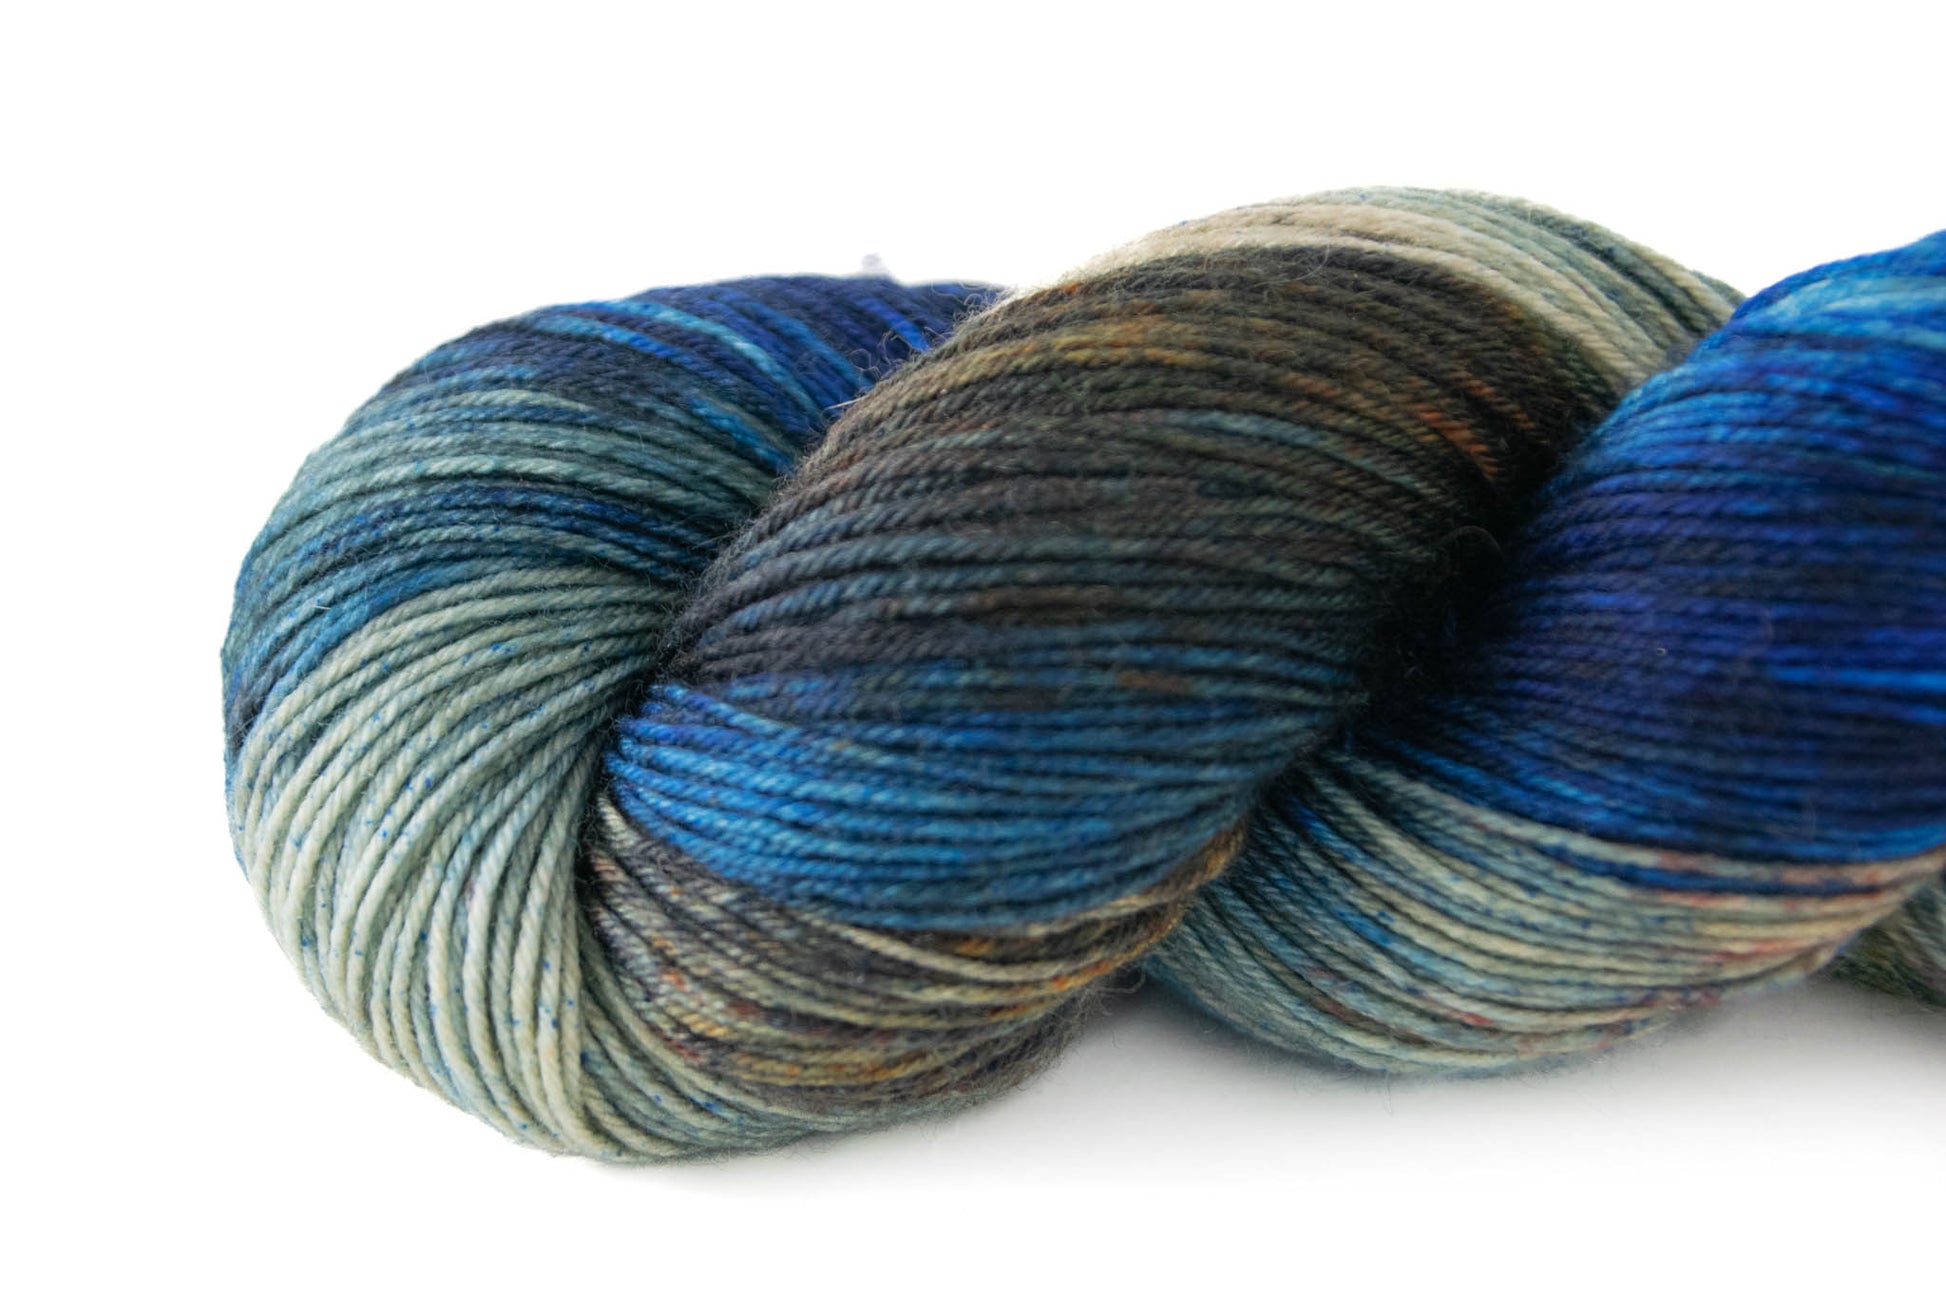 Closeup on end of skein with blue and brown sections and two sections of tan, one with blue speckles and one with orange and brown speckles.